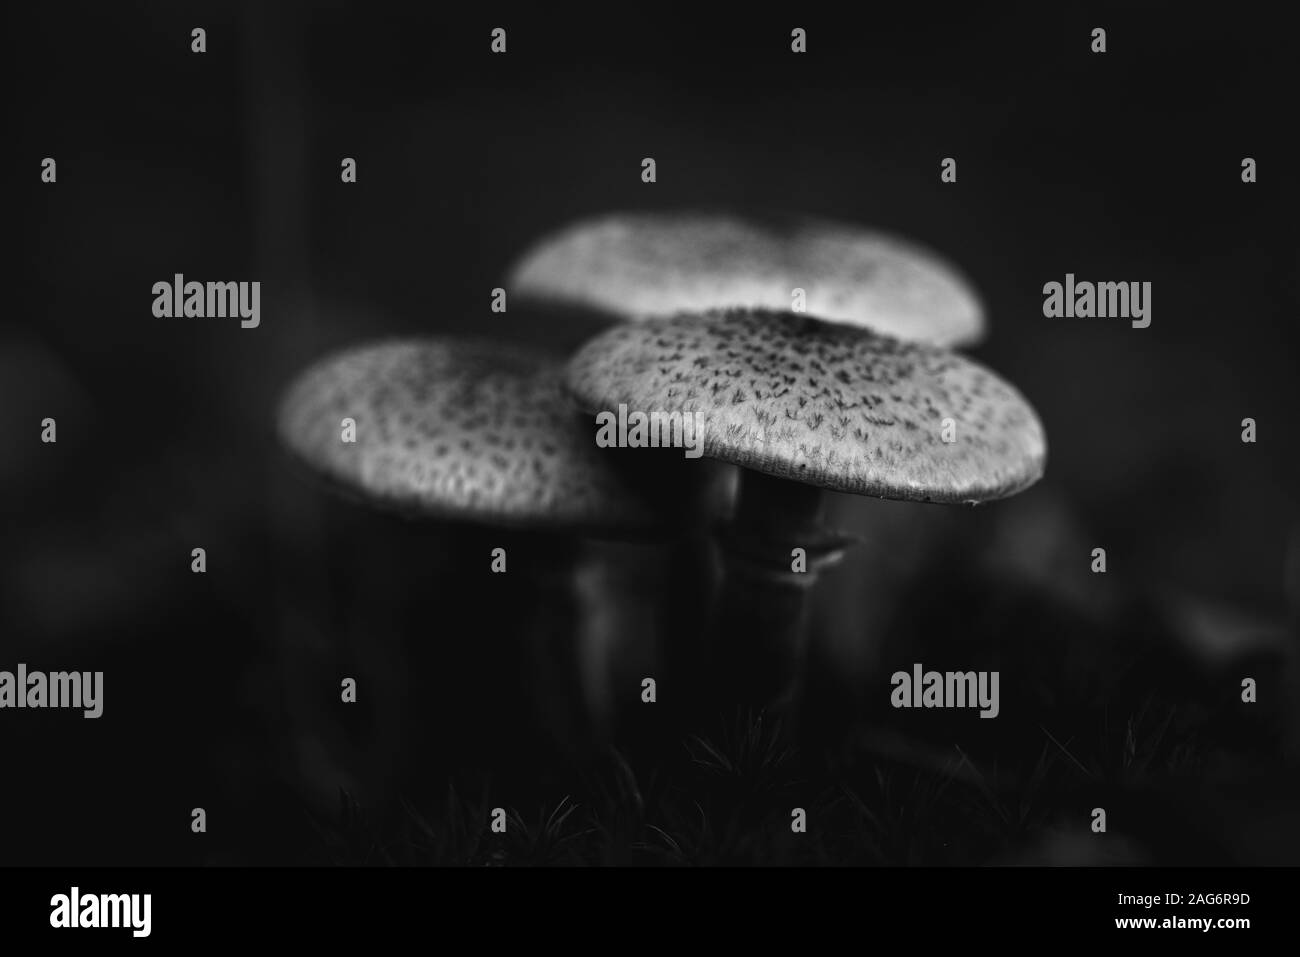 Grayscale selective focus shot of a wild fungus on black background Stock Photo